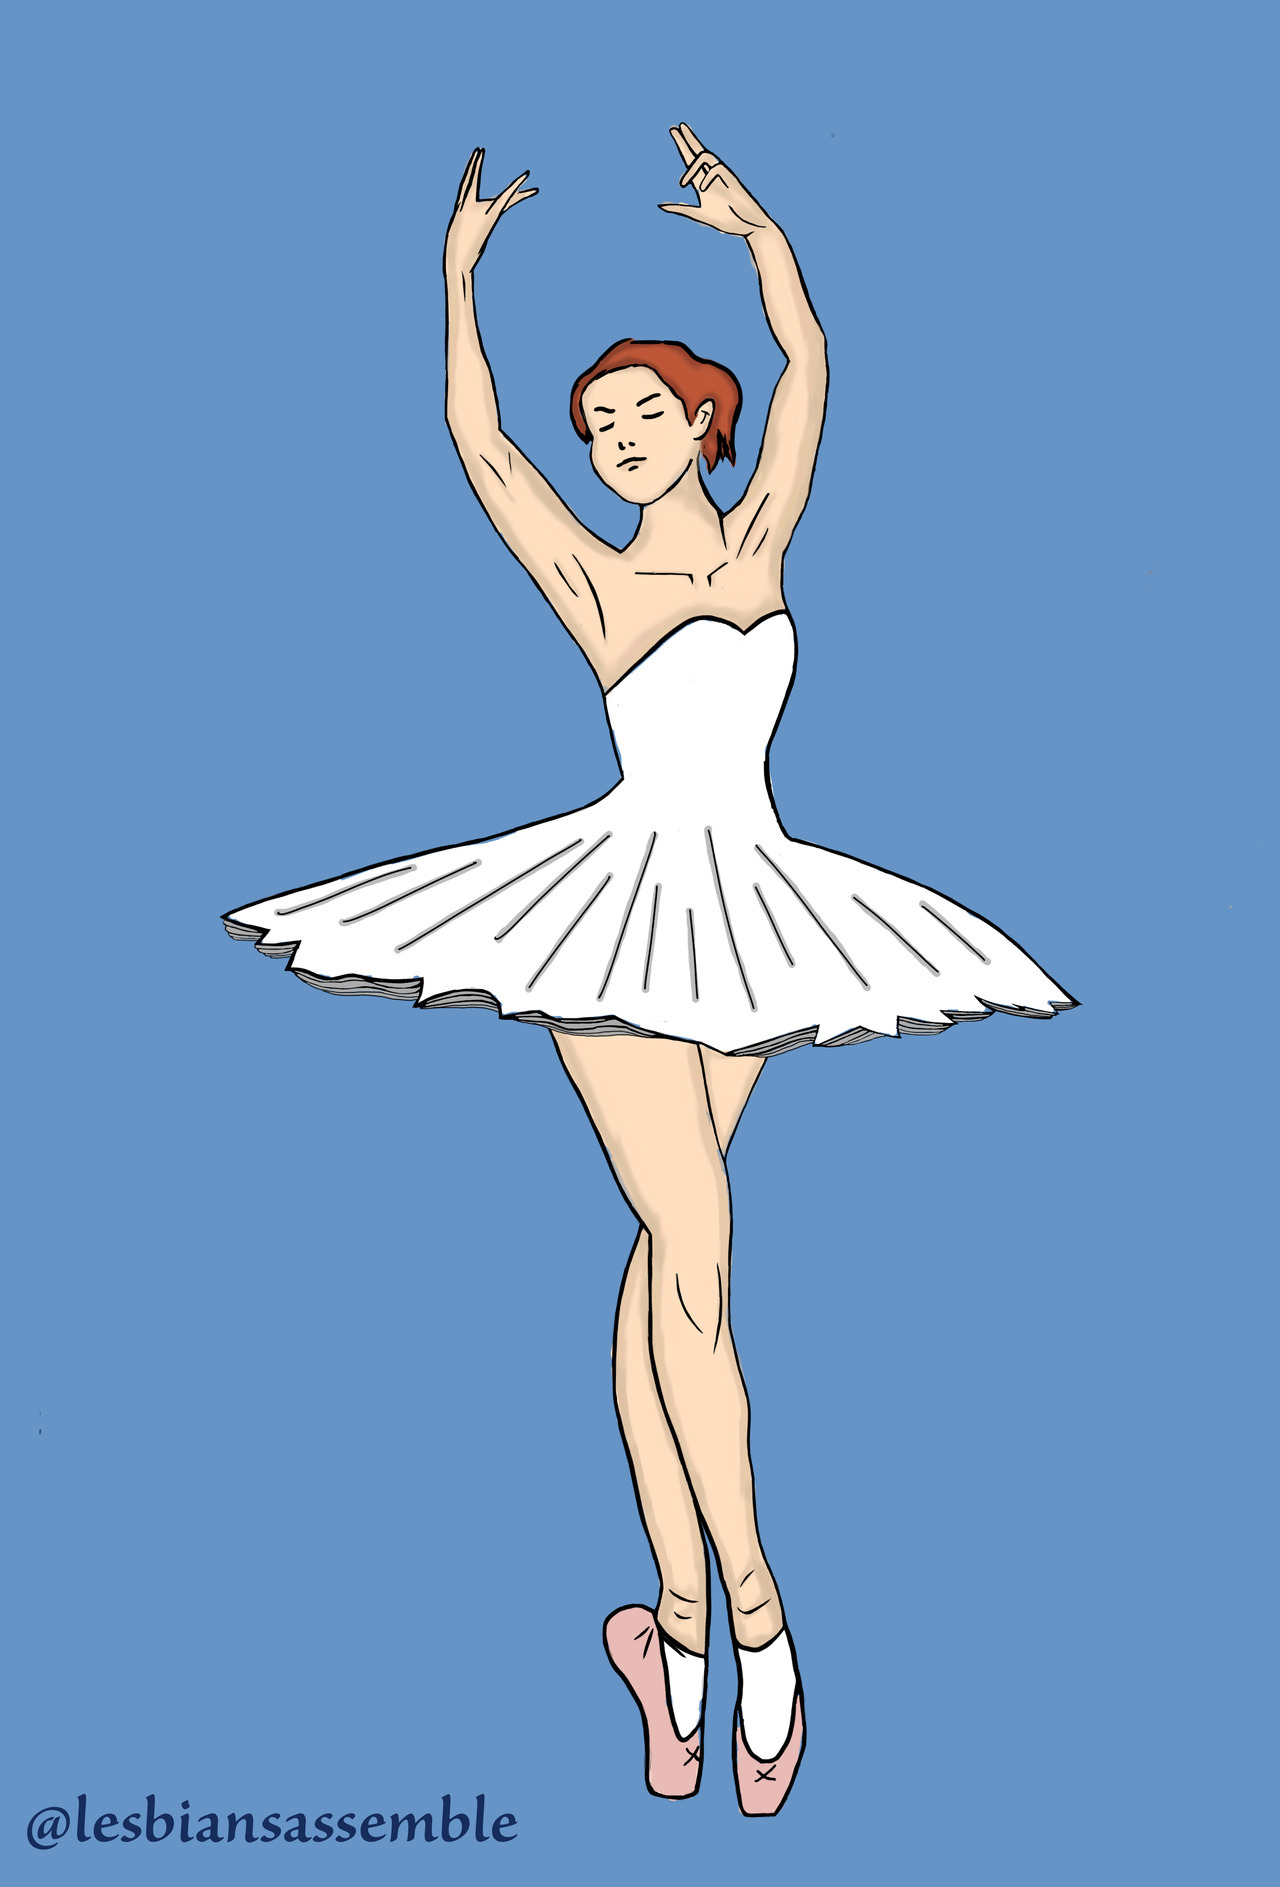 administration Simuler Bageri archive. — A young Natasha Romanoff performing ballet